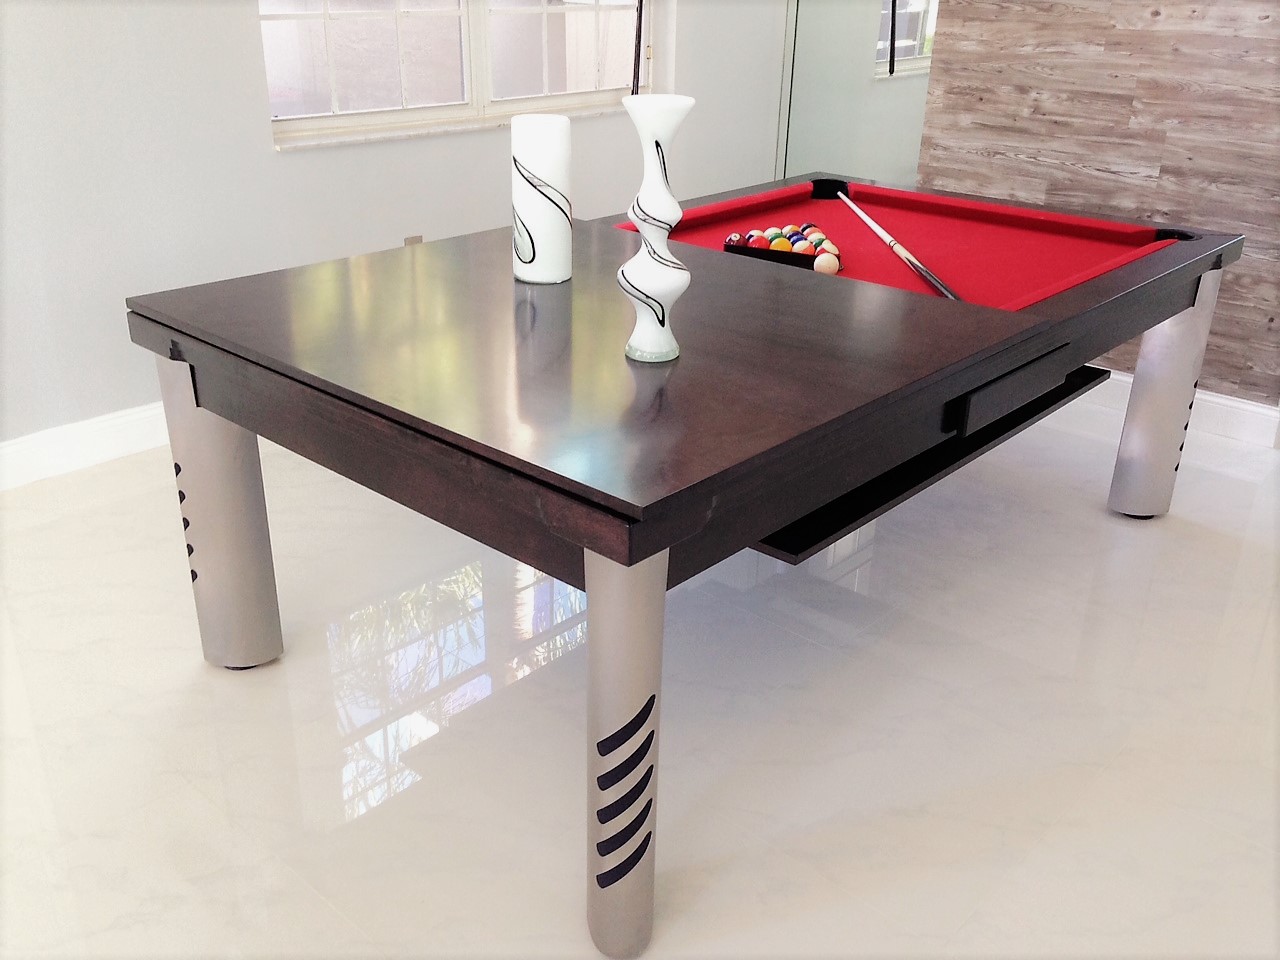 Convertible dining pool fusion table Mirage by Vision Billiards in espresso